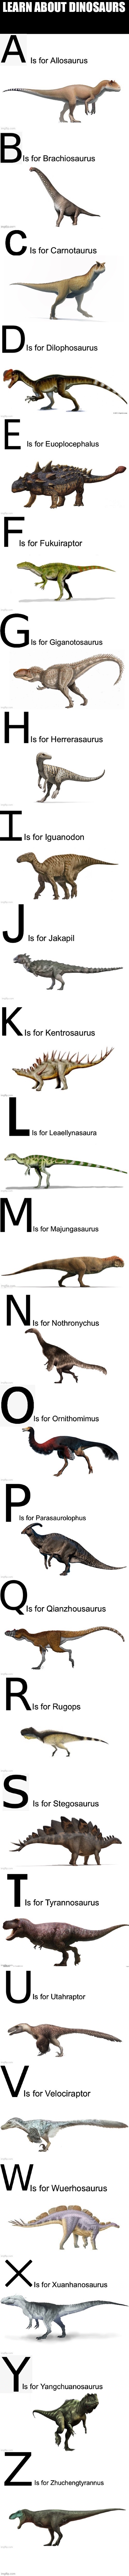 Learn dinosaurs | image tagged in dinosaurs,alphabet,dinosaur | made w/ Imgflip meme maker